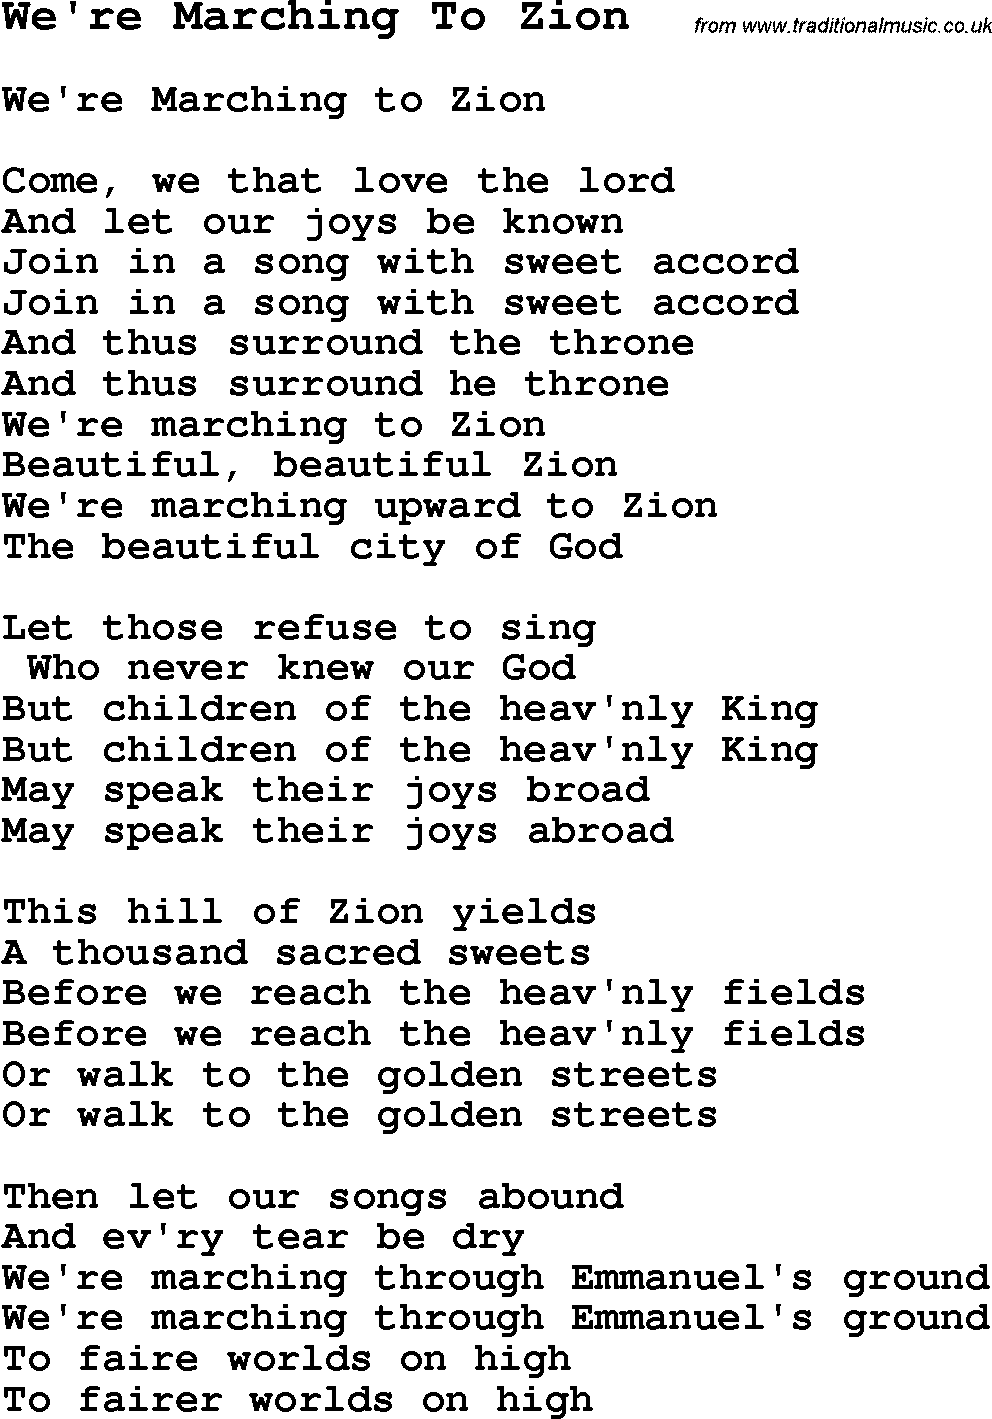 Negro Spiritual Song Lyrics for We're Marching To Zion